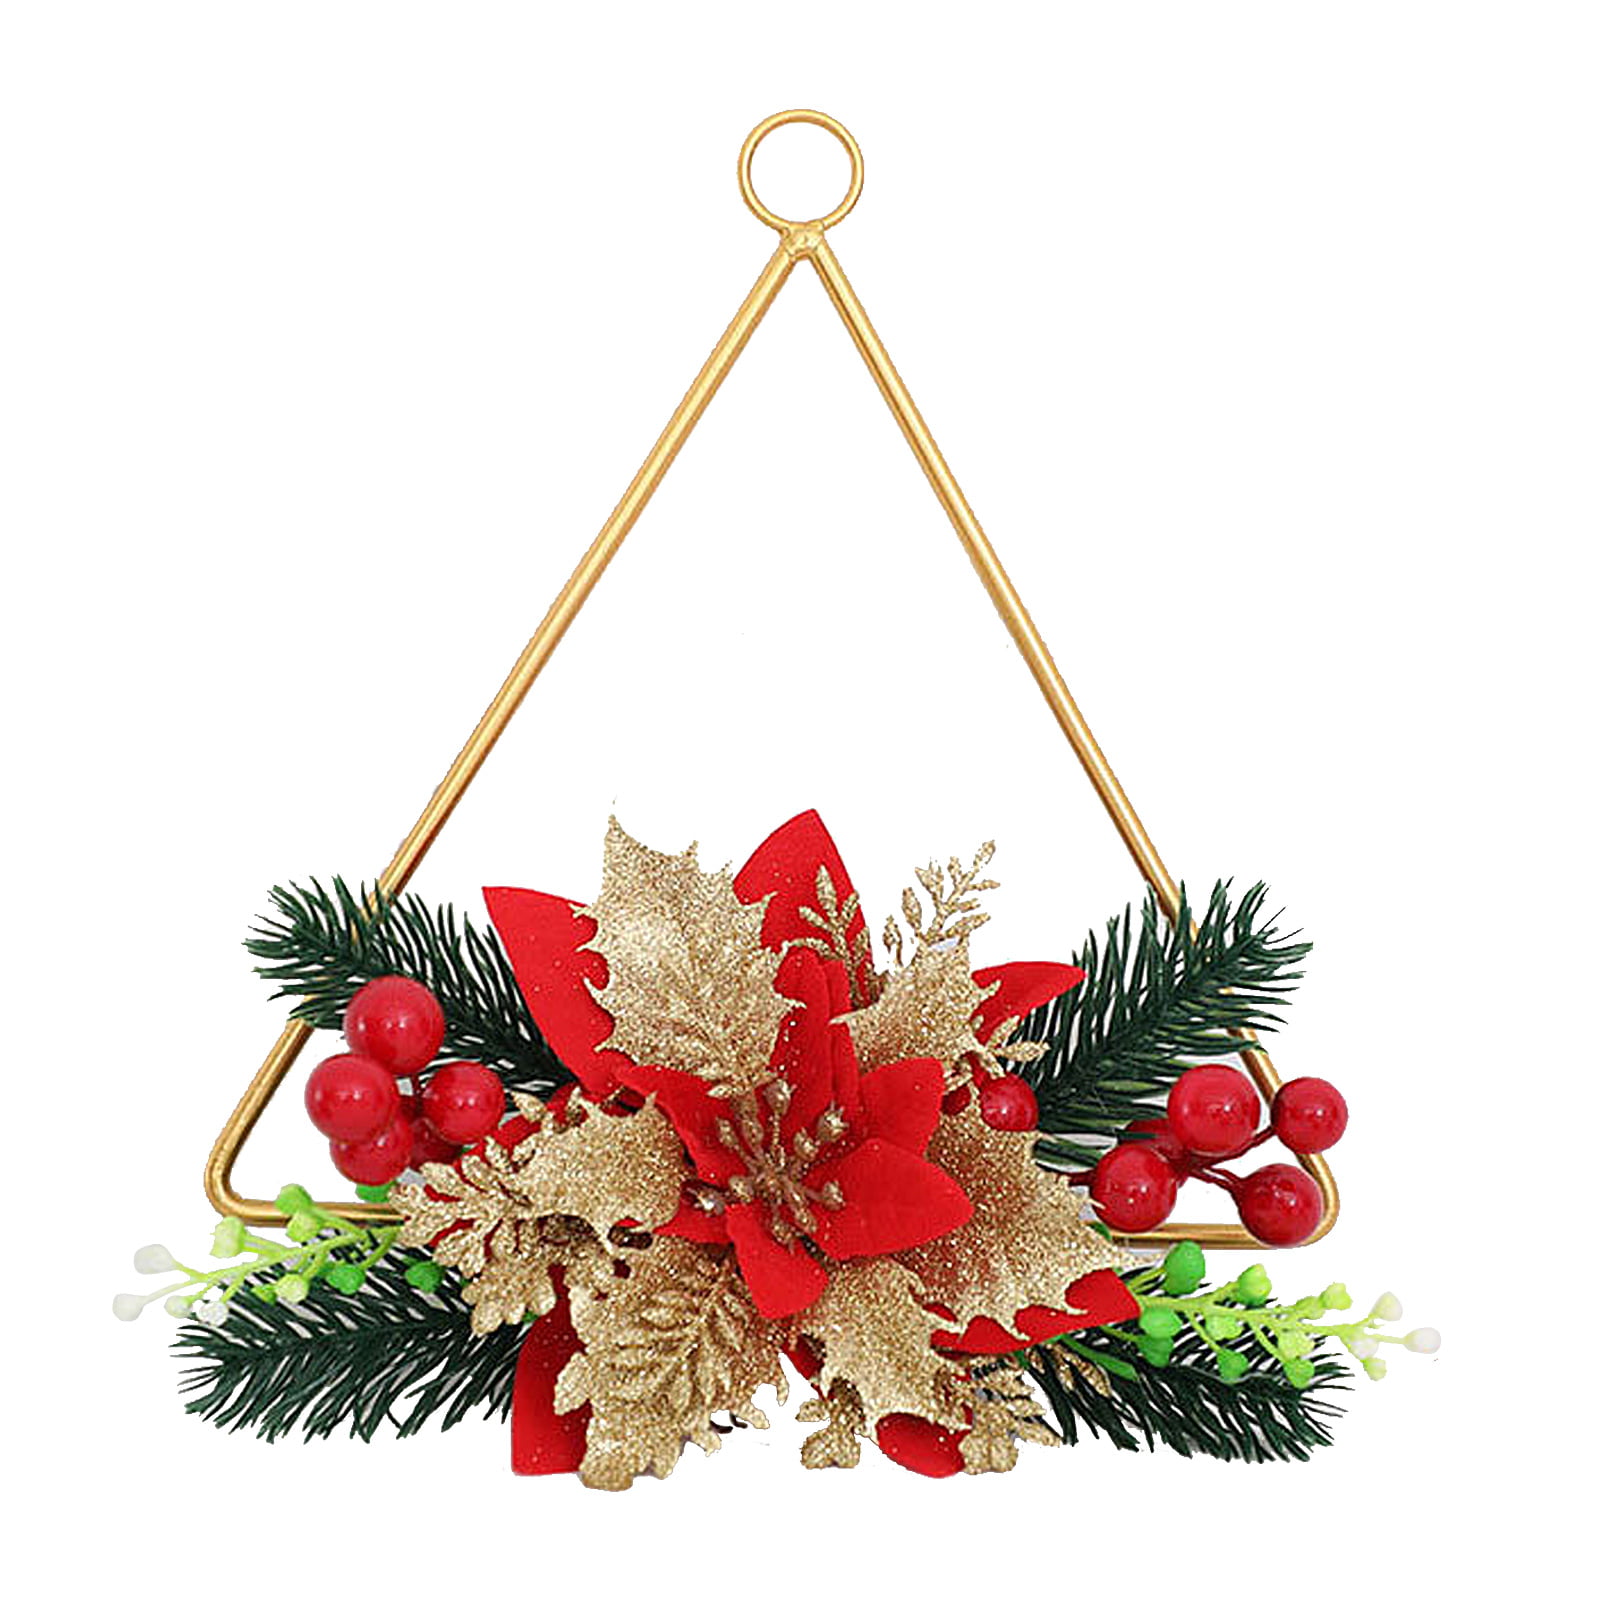 Details about   Christmas Tree Wreath Wall Hanging Garland Window Door Ornament Xmas Party Decor 